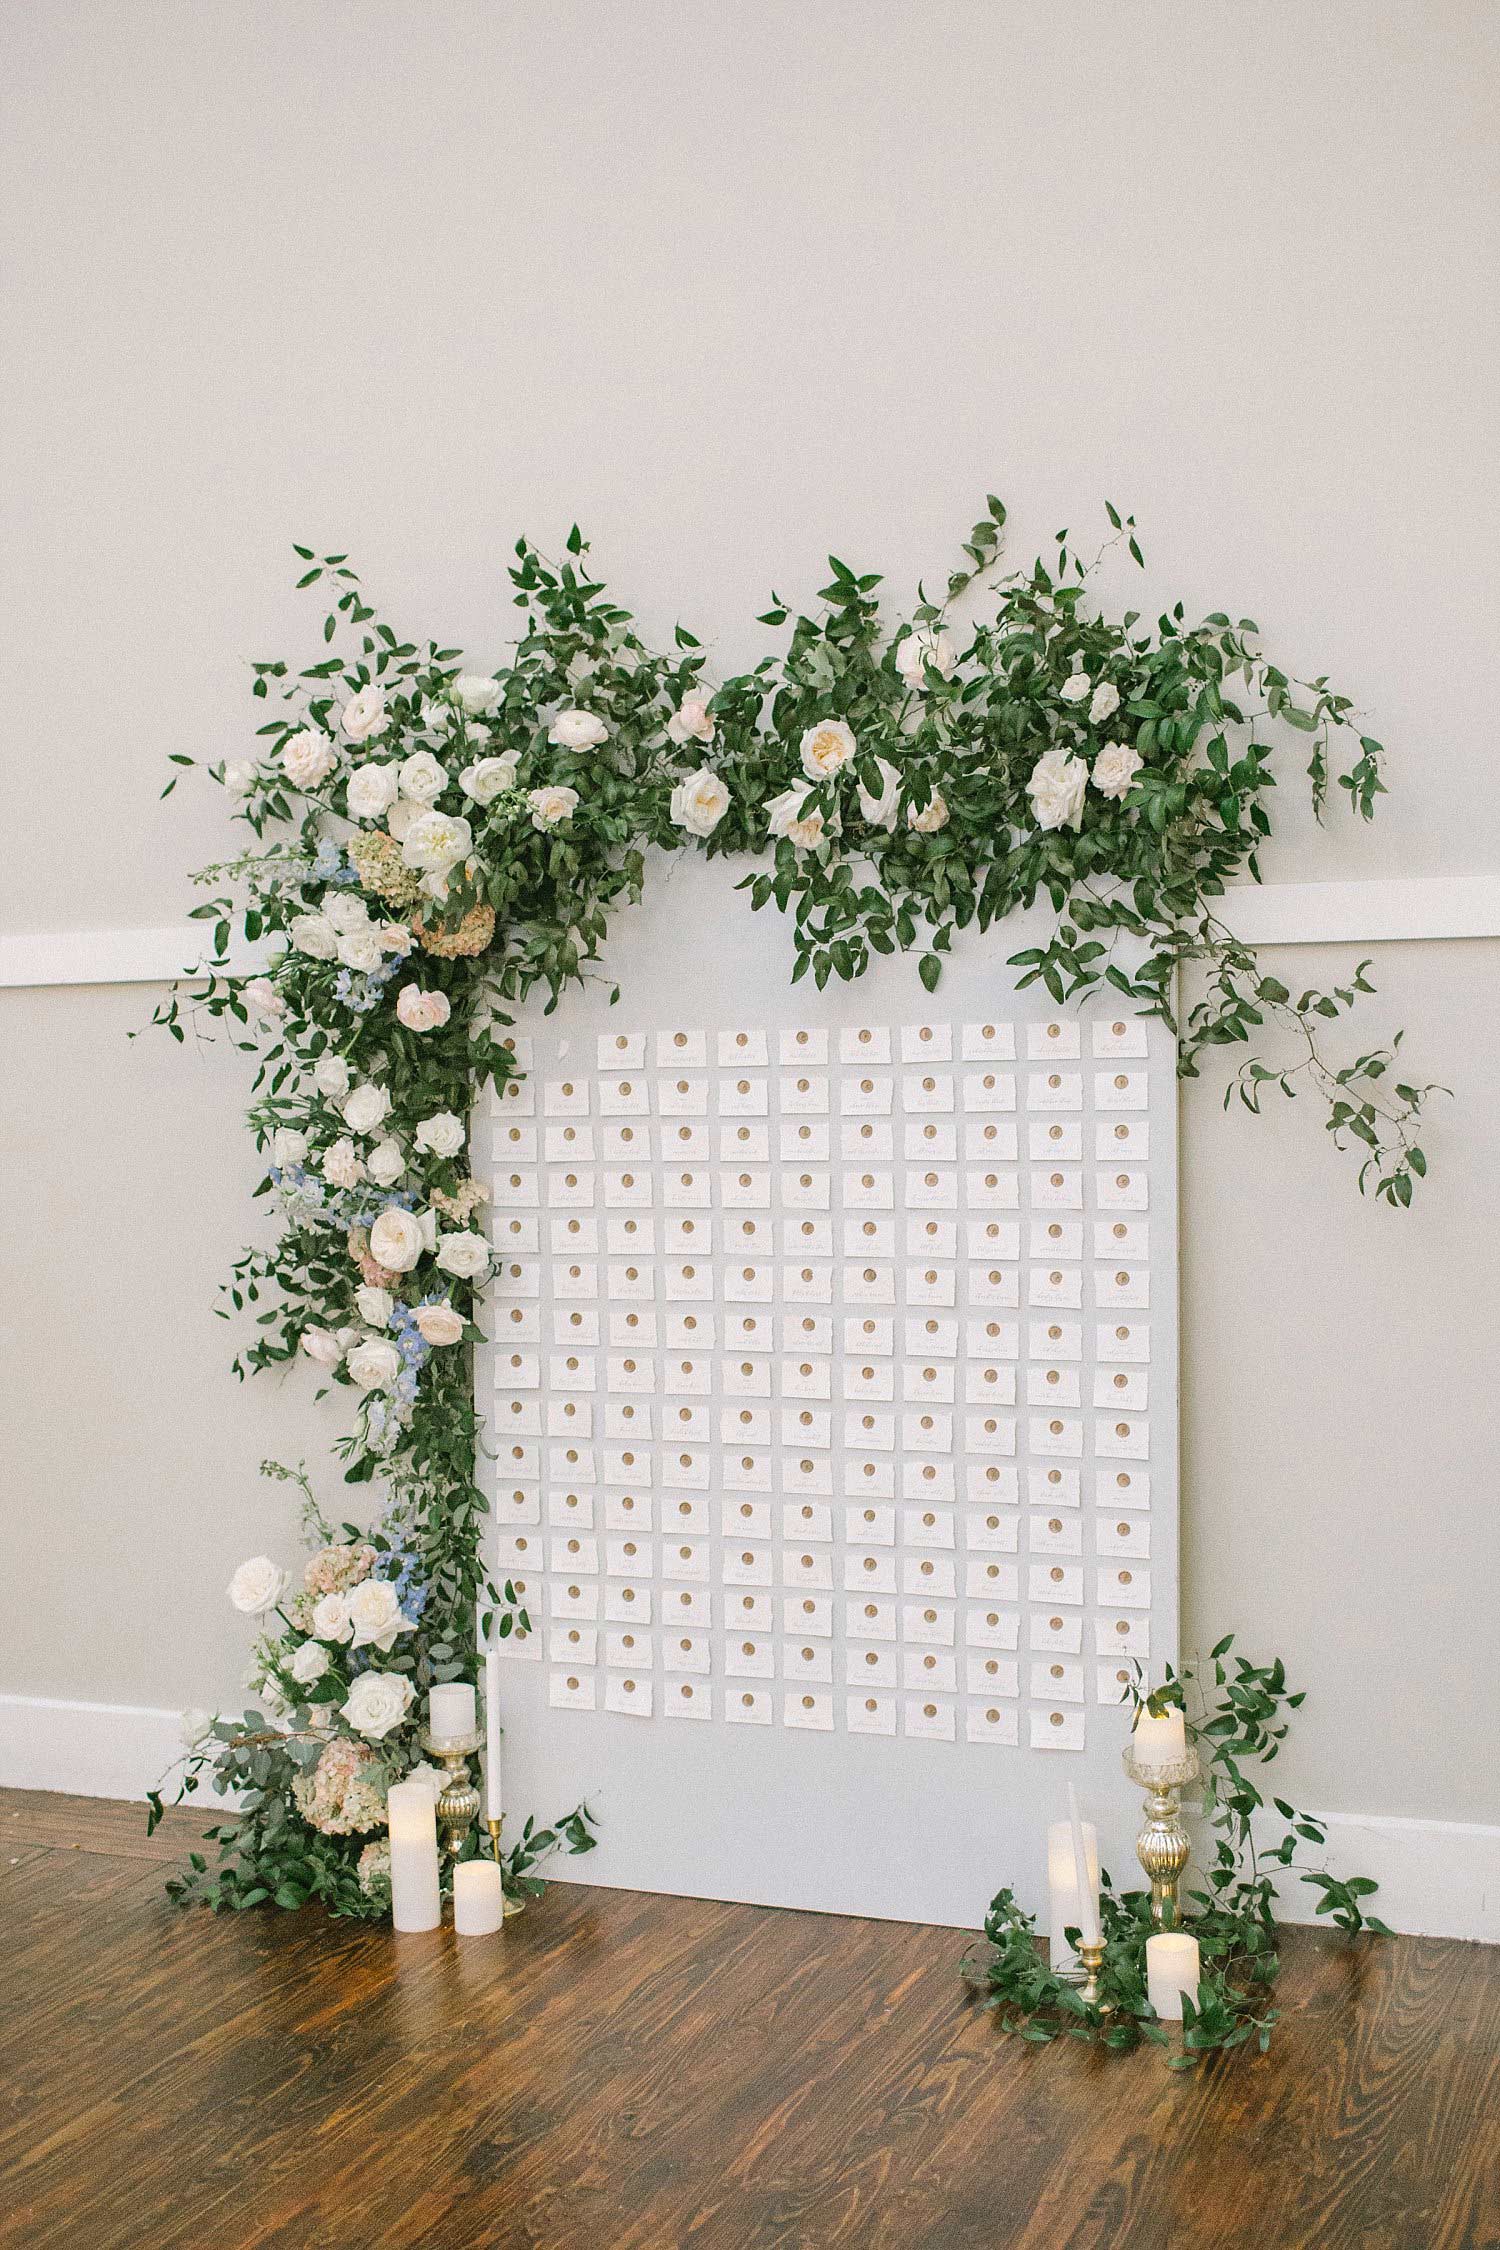 Grey wax seal seating chart with organic flowers